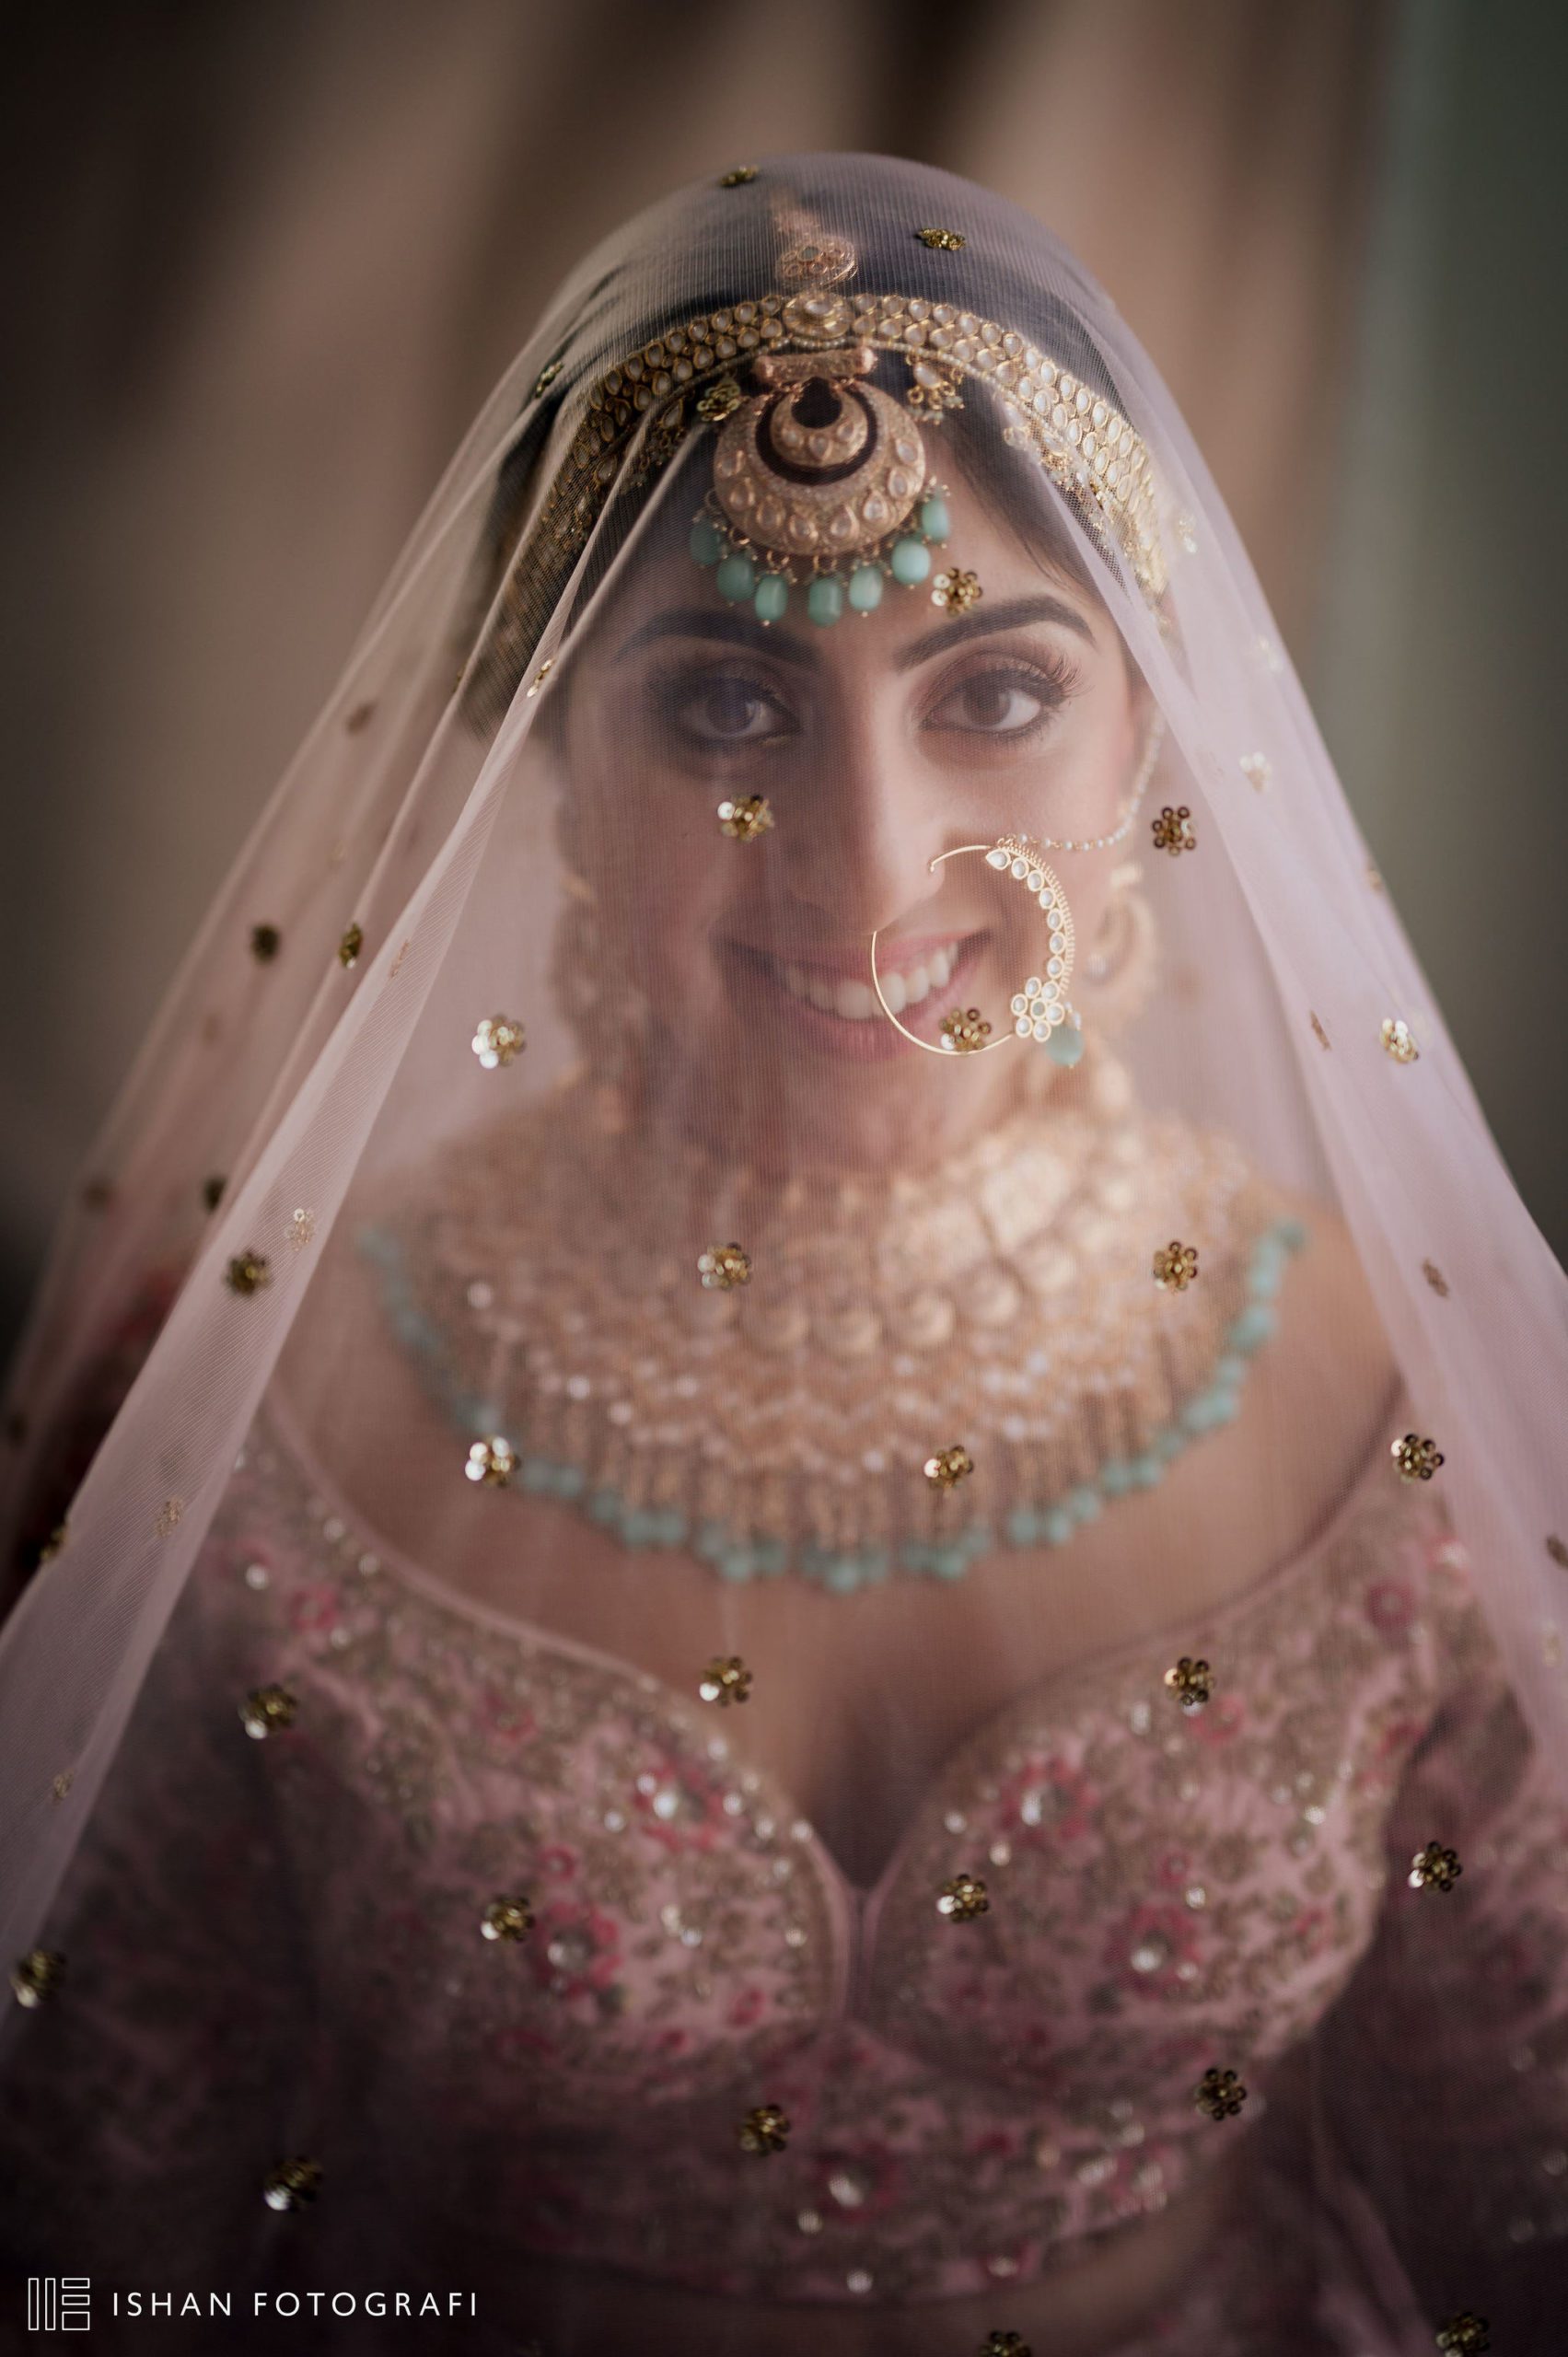 Radiant Indian bride in NJ prepares for the wedding ceremony with help from loved ones.